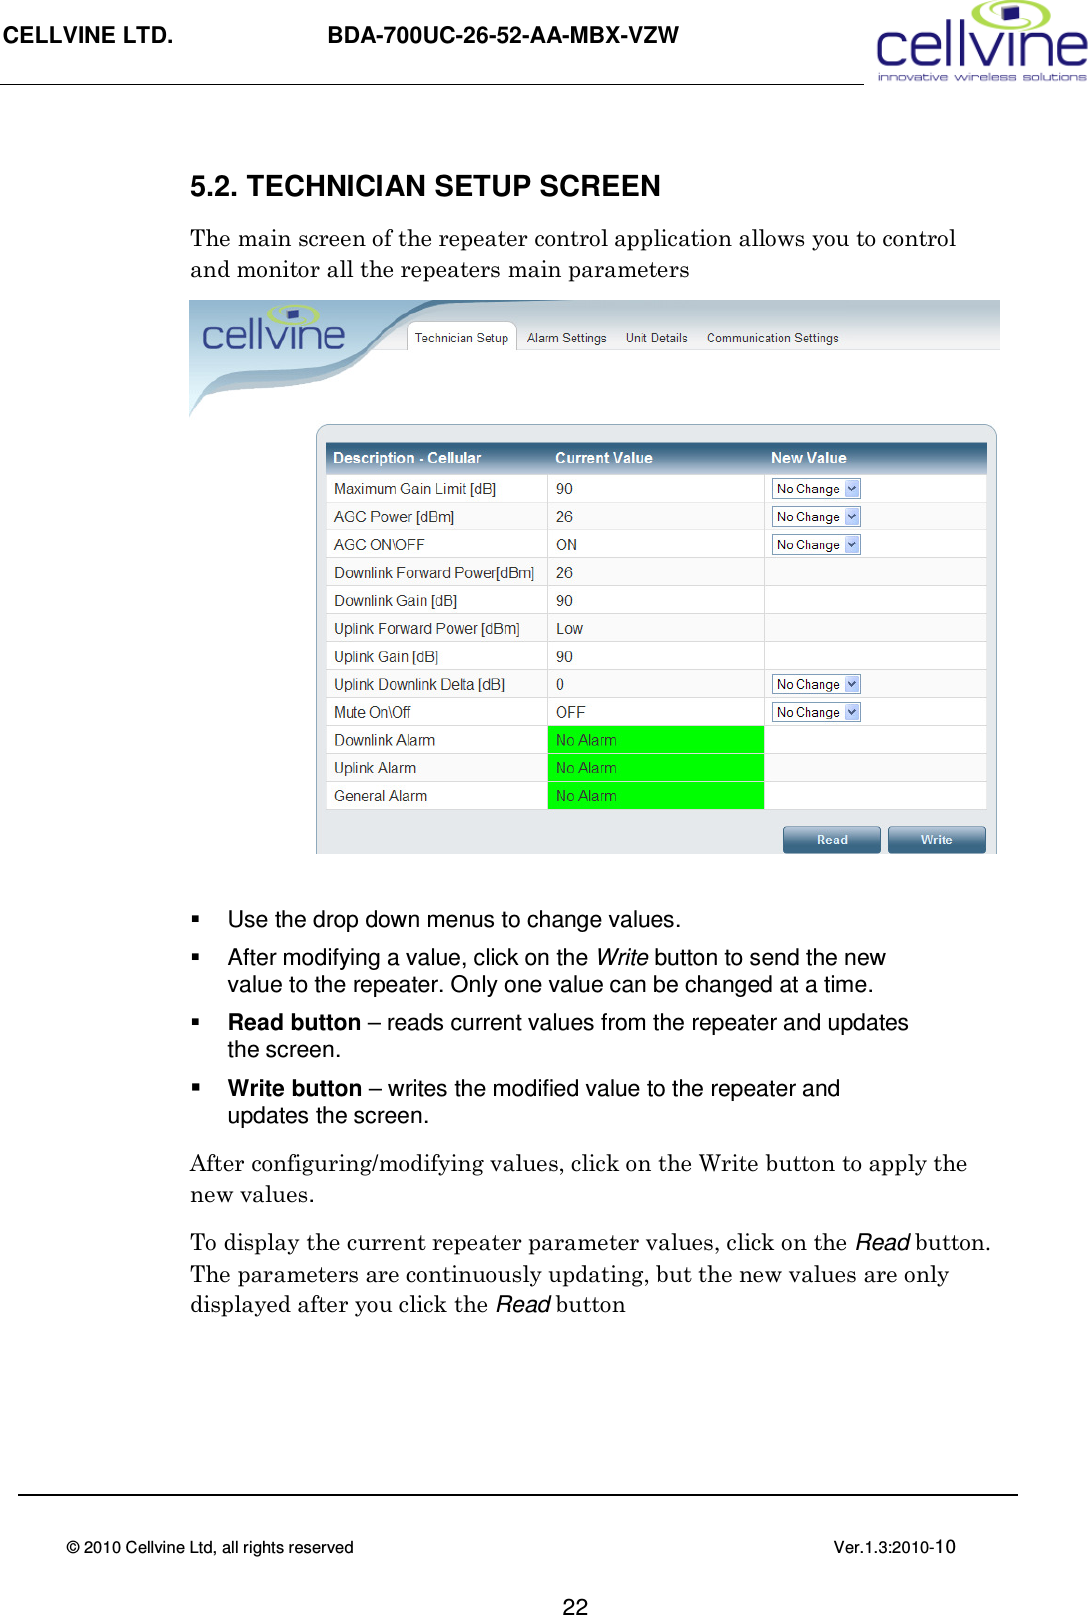 CELLVINE LTD.                   BDA-700UC-26-52-AA-MBX-VZW                               © 2010 Cellvine Ltd, all rights reserved                                                                                            Ver.1.3:2010-10                                                                                                                                       22 5.2. TECHNICIAN SETUP SCREEN The main screen of the repeater control application allows you to control and monitor all the repeaters main parameters                Use the drop down menus to change values.   After modifying a value, click on the Write button to send the new value to the repeater. Only one value can be changed at a time.  Read button – reads current values from the repeater and updates the screen.  Write button – writes the modified value to the repeater and updates the screen.  After configuring/modifying values, click on the Write button to apply the new values. To display the current repeater parameter values, click on the Read button. The parameters are continuously updating, but the new values are only displayed after you click the Read button  